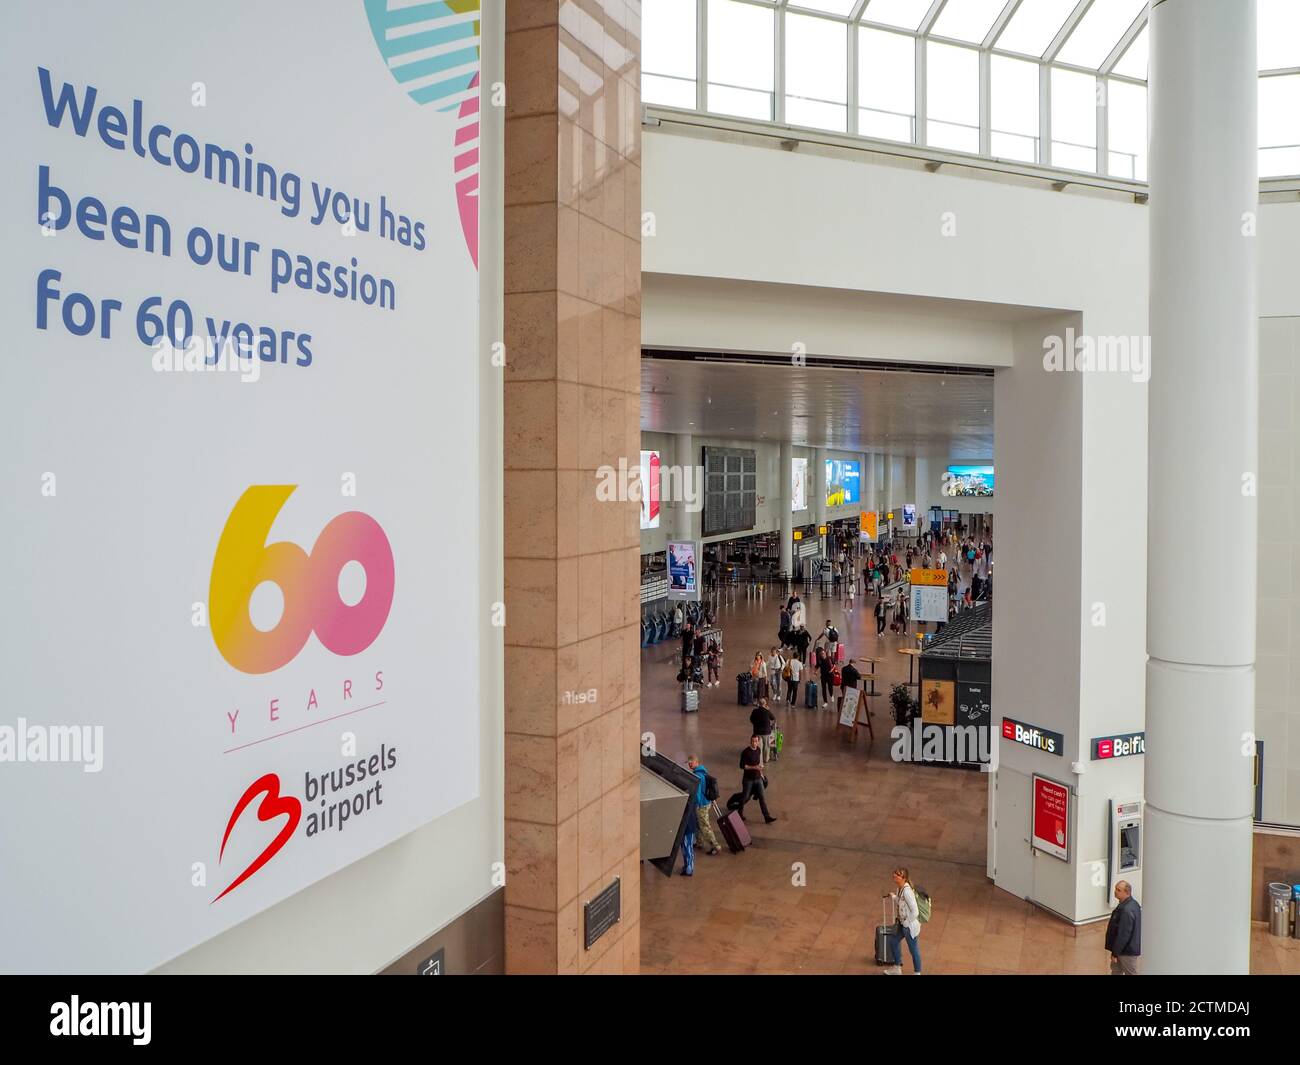 August 2018 - Zaventem, Belgium: Large banner celebrating the 60th anniversary of Brussels Airport hanging in the check-in hall of the airport. Stock Photo